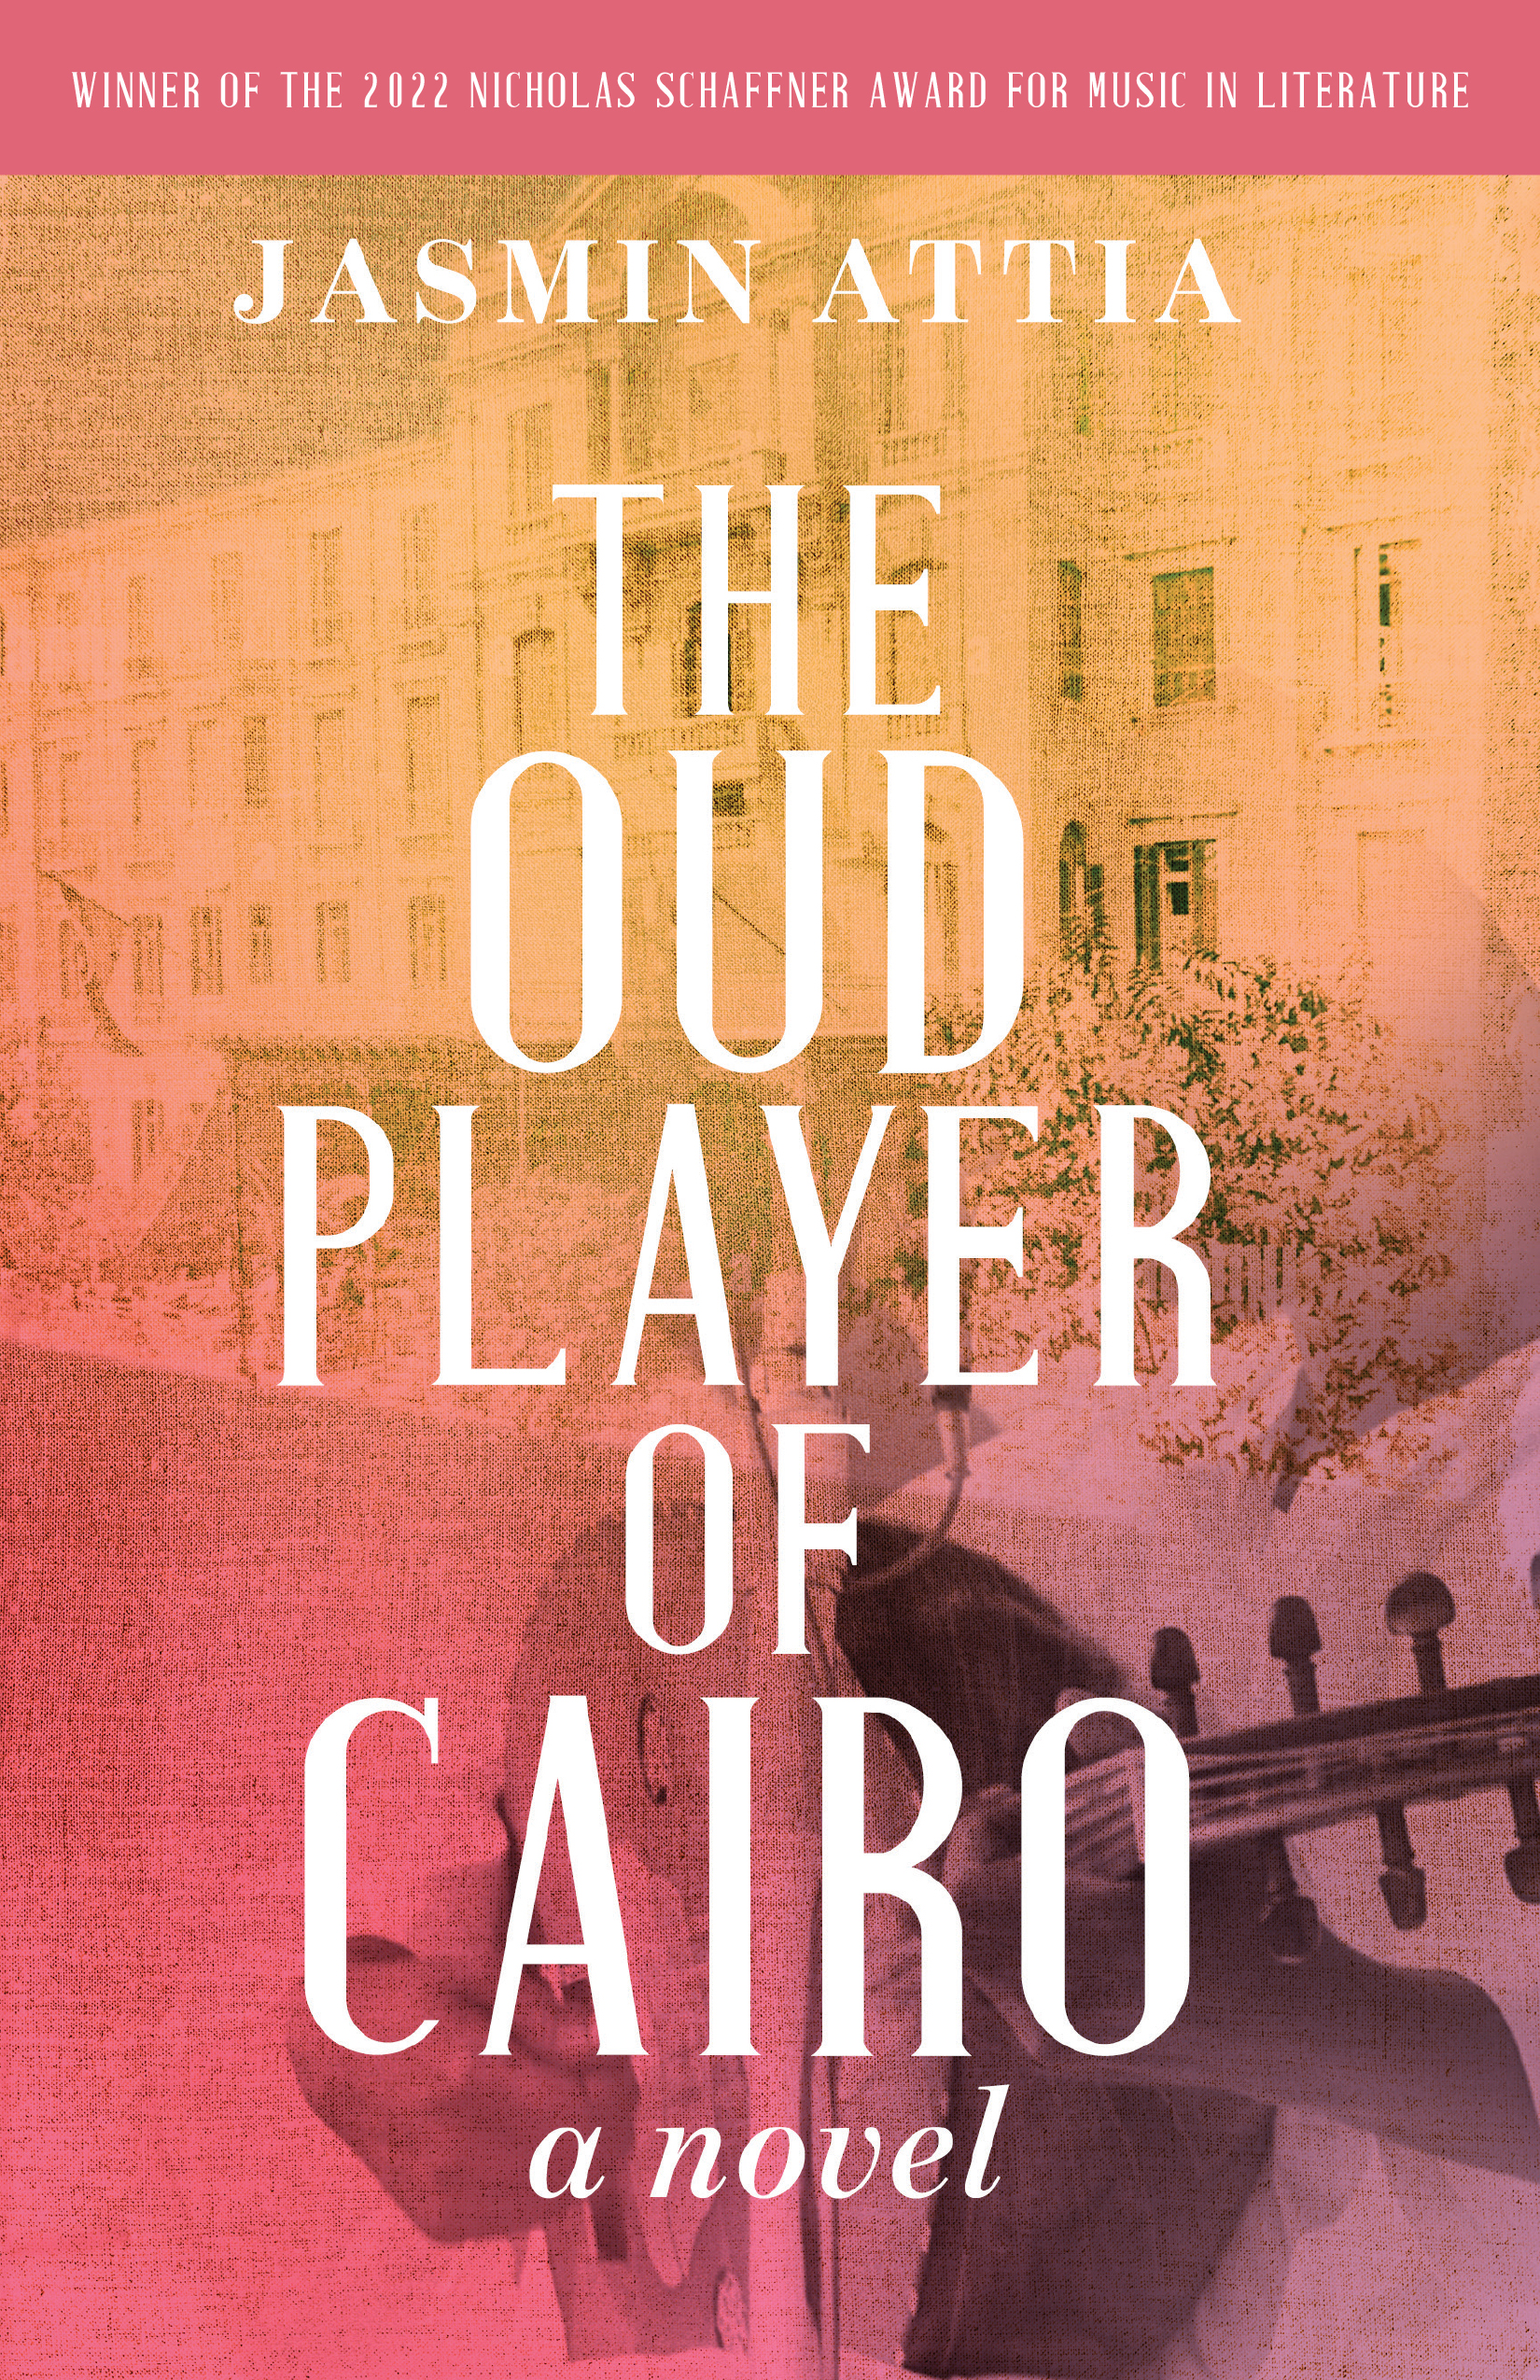 The Oud Player of Cairo